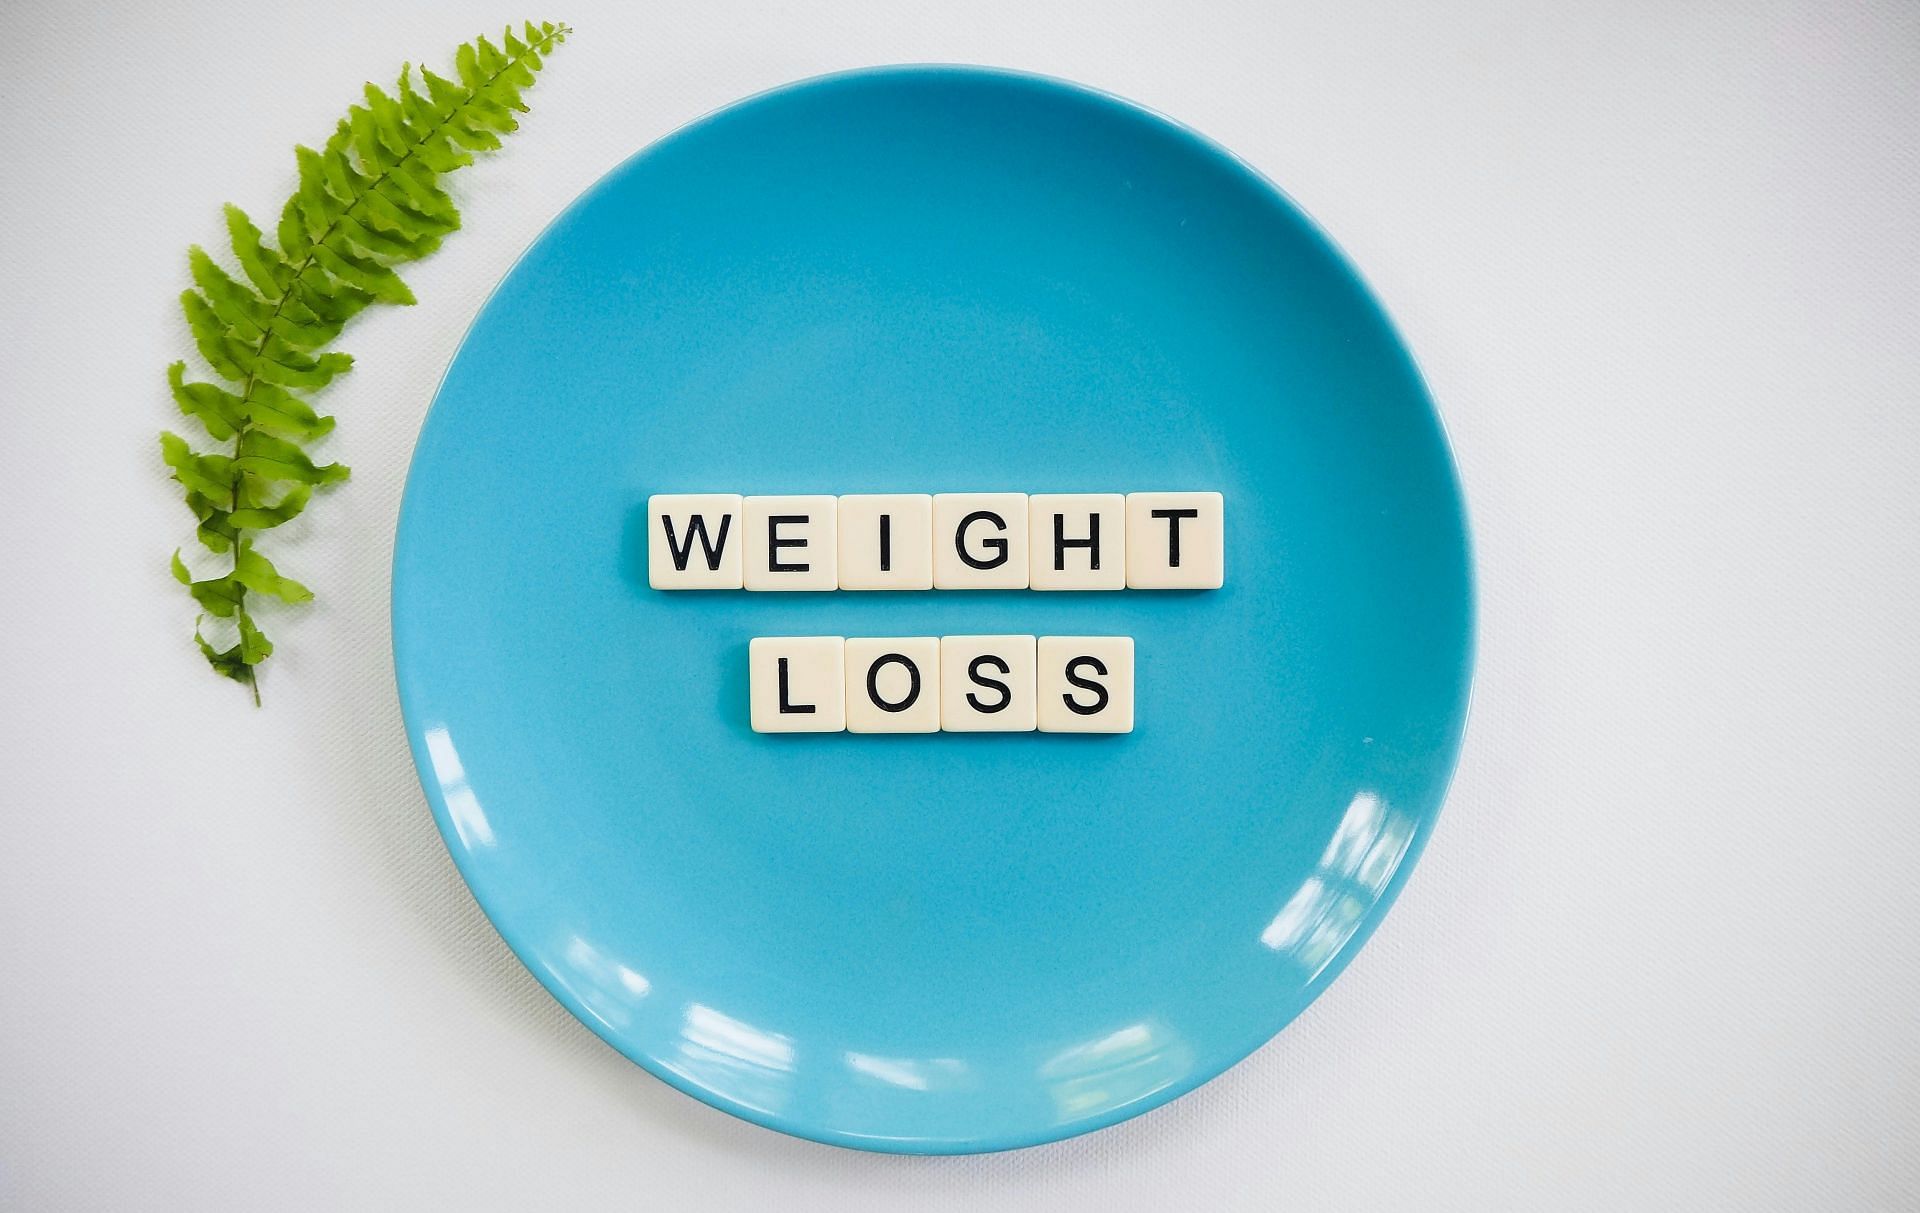 Not consuming or drinking dairy products can lead to weight loss(Image by Total Shape/Unsplash)